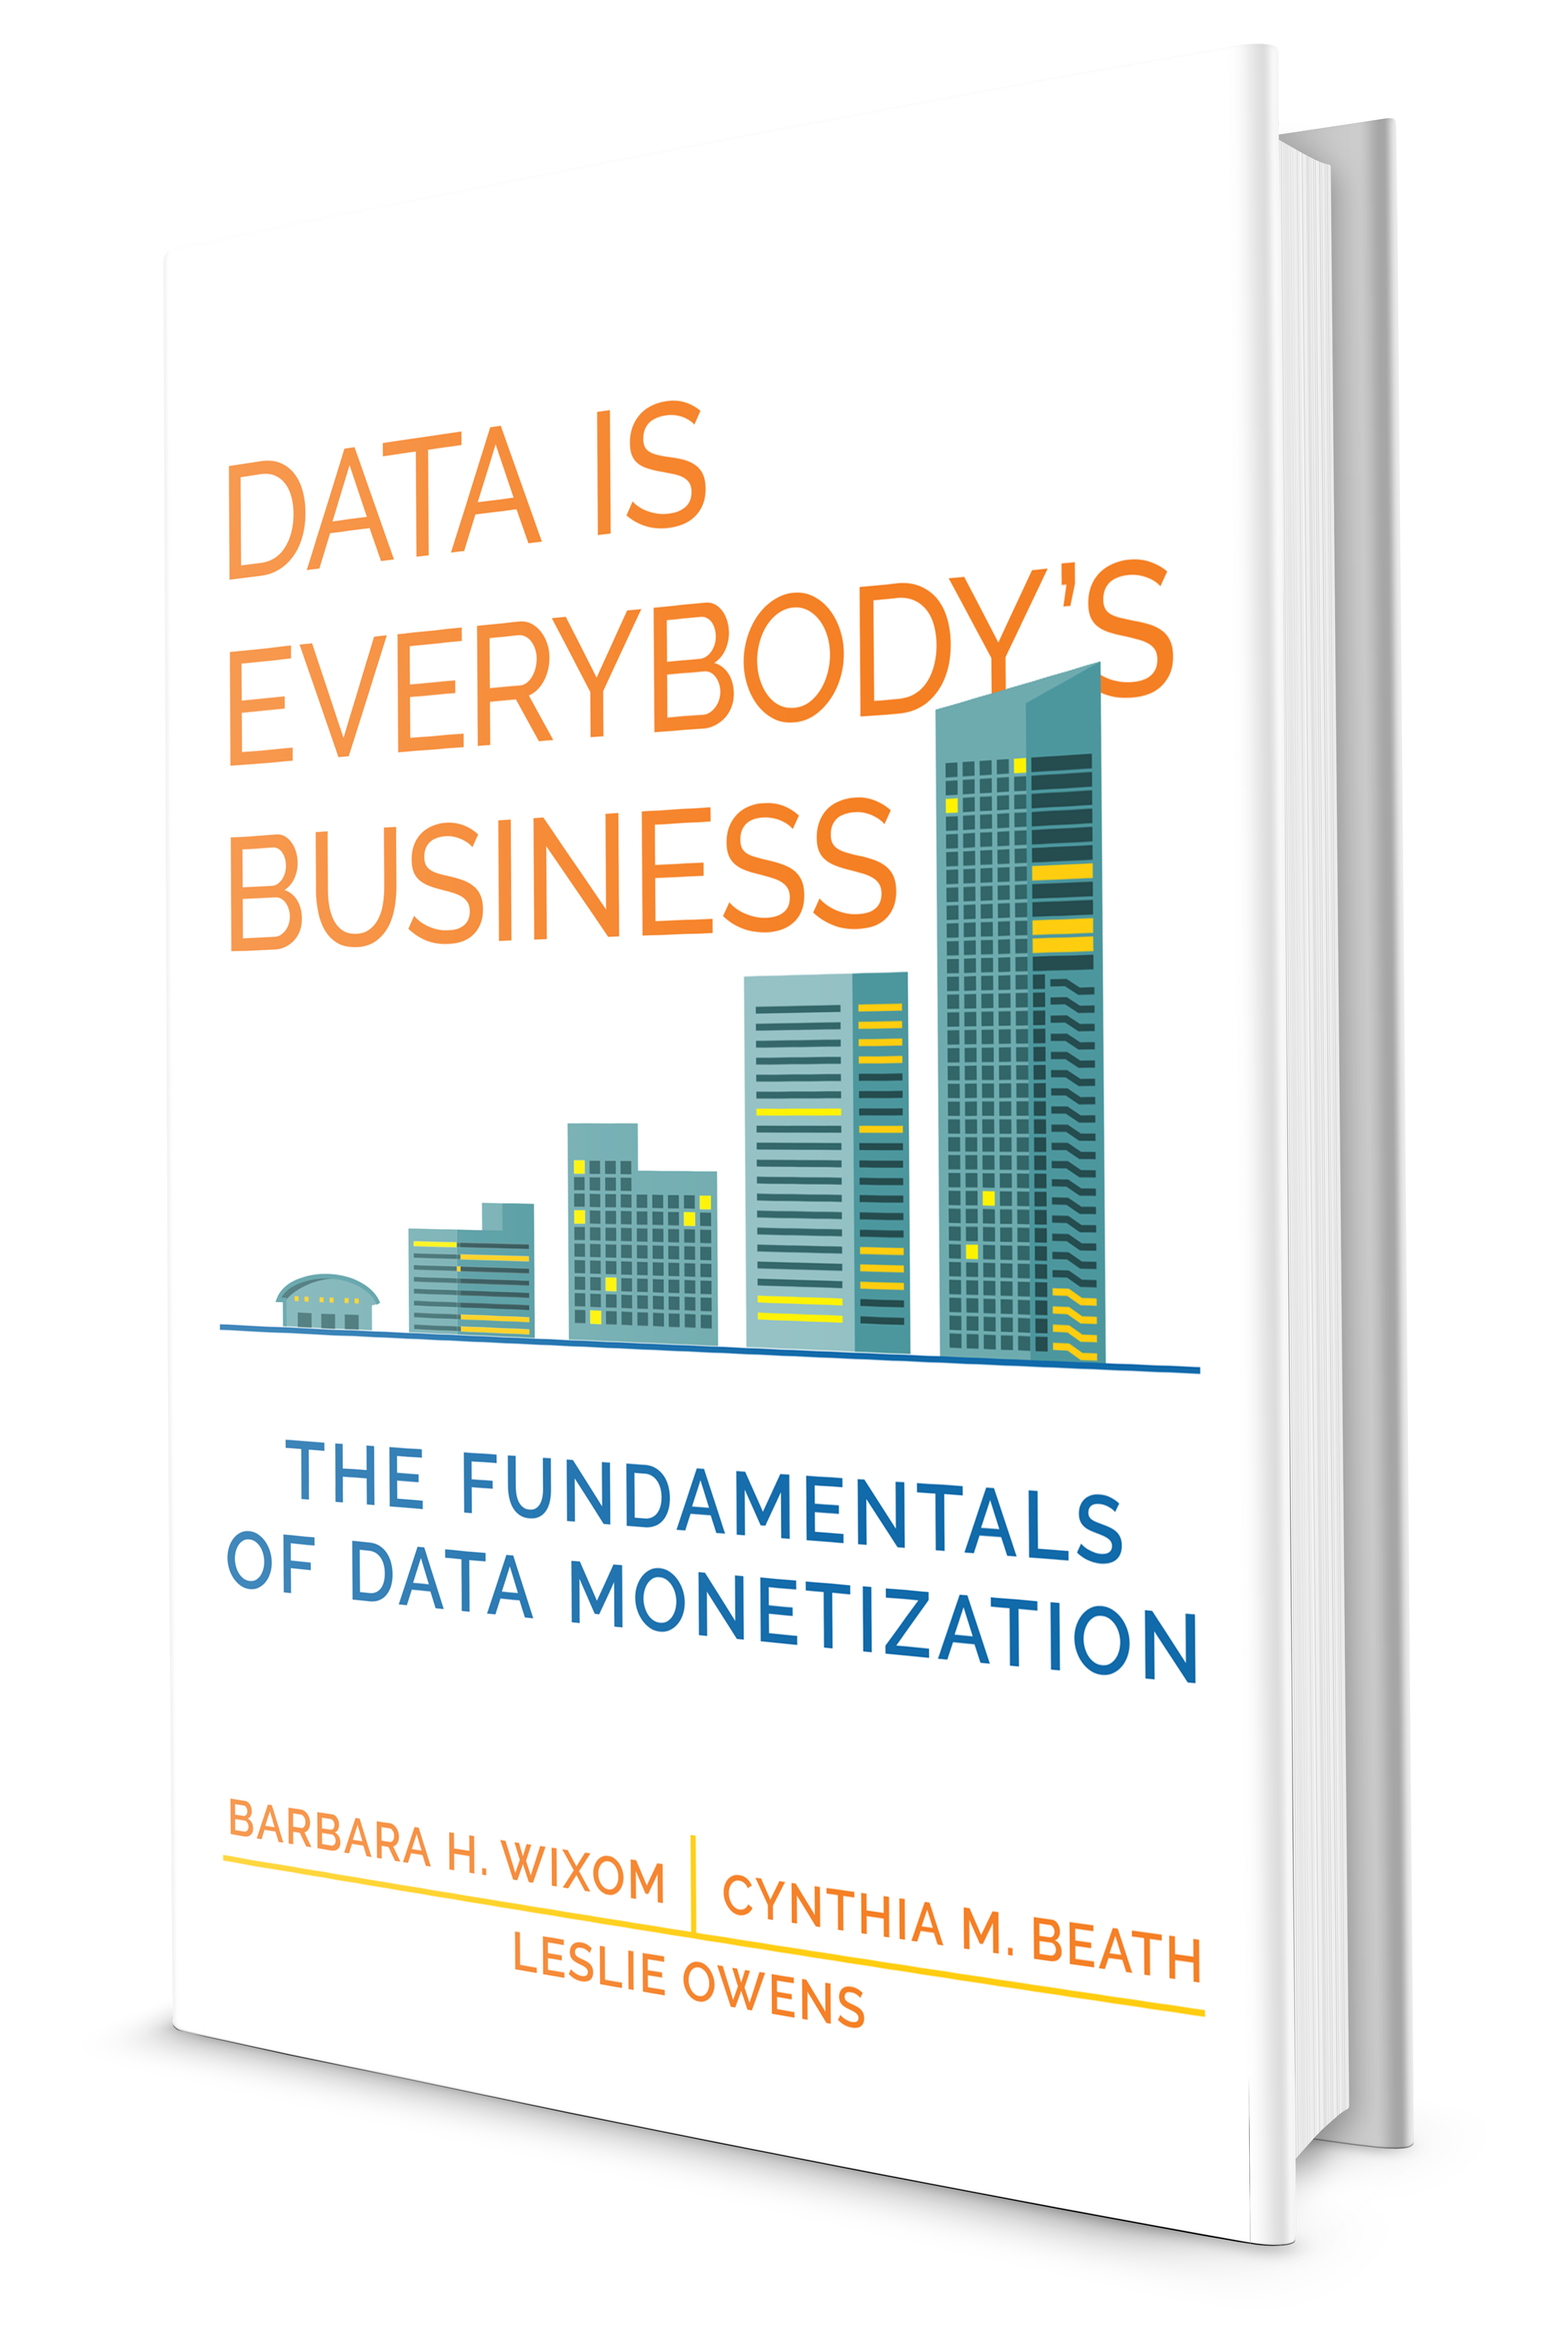 Data Is Everybody's Business 3-D cover